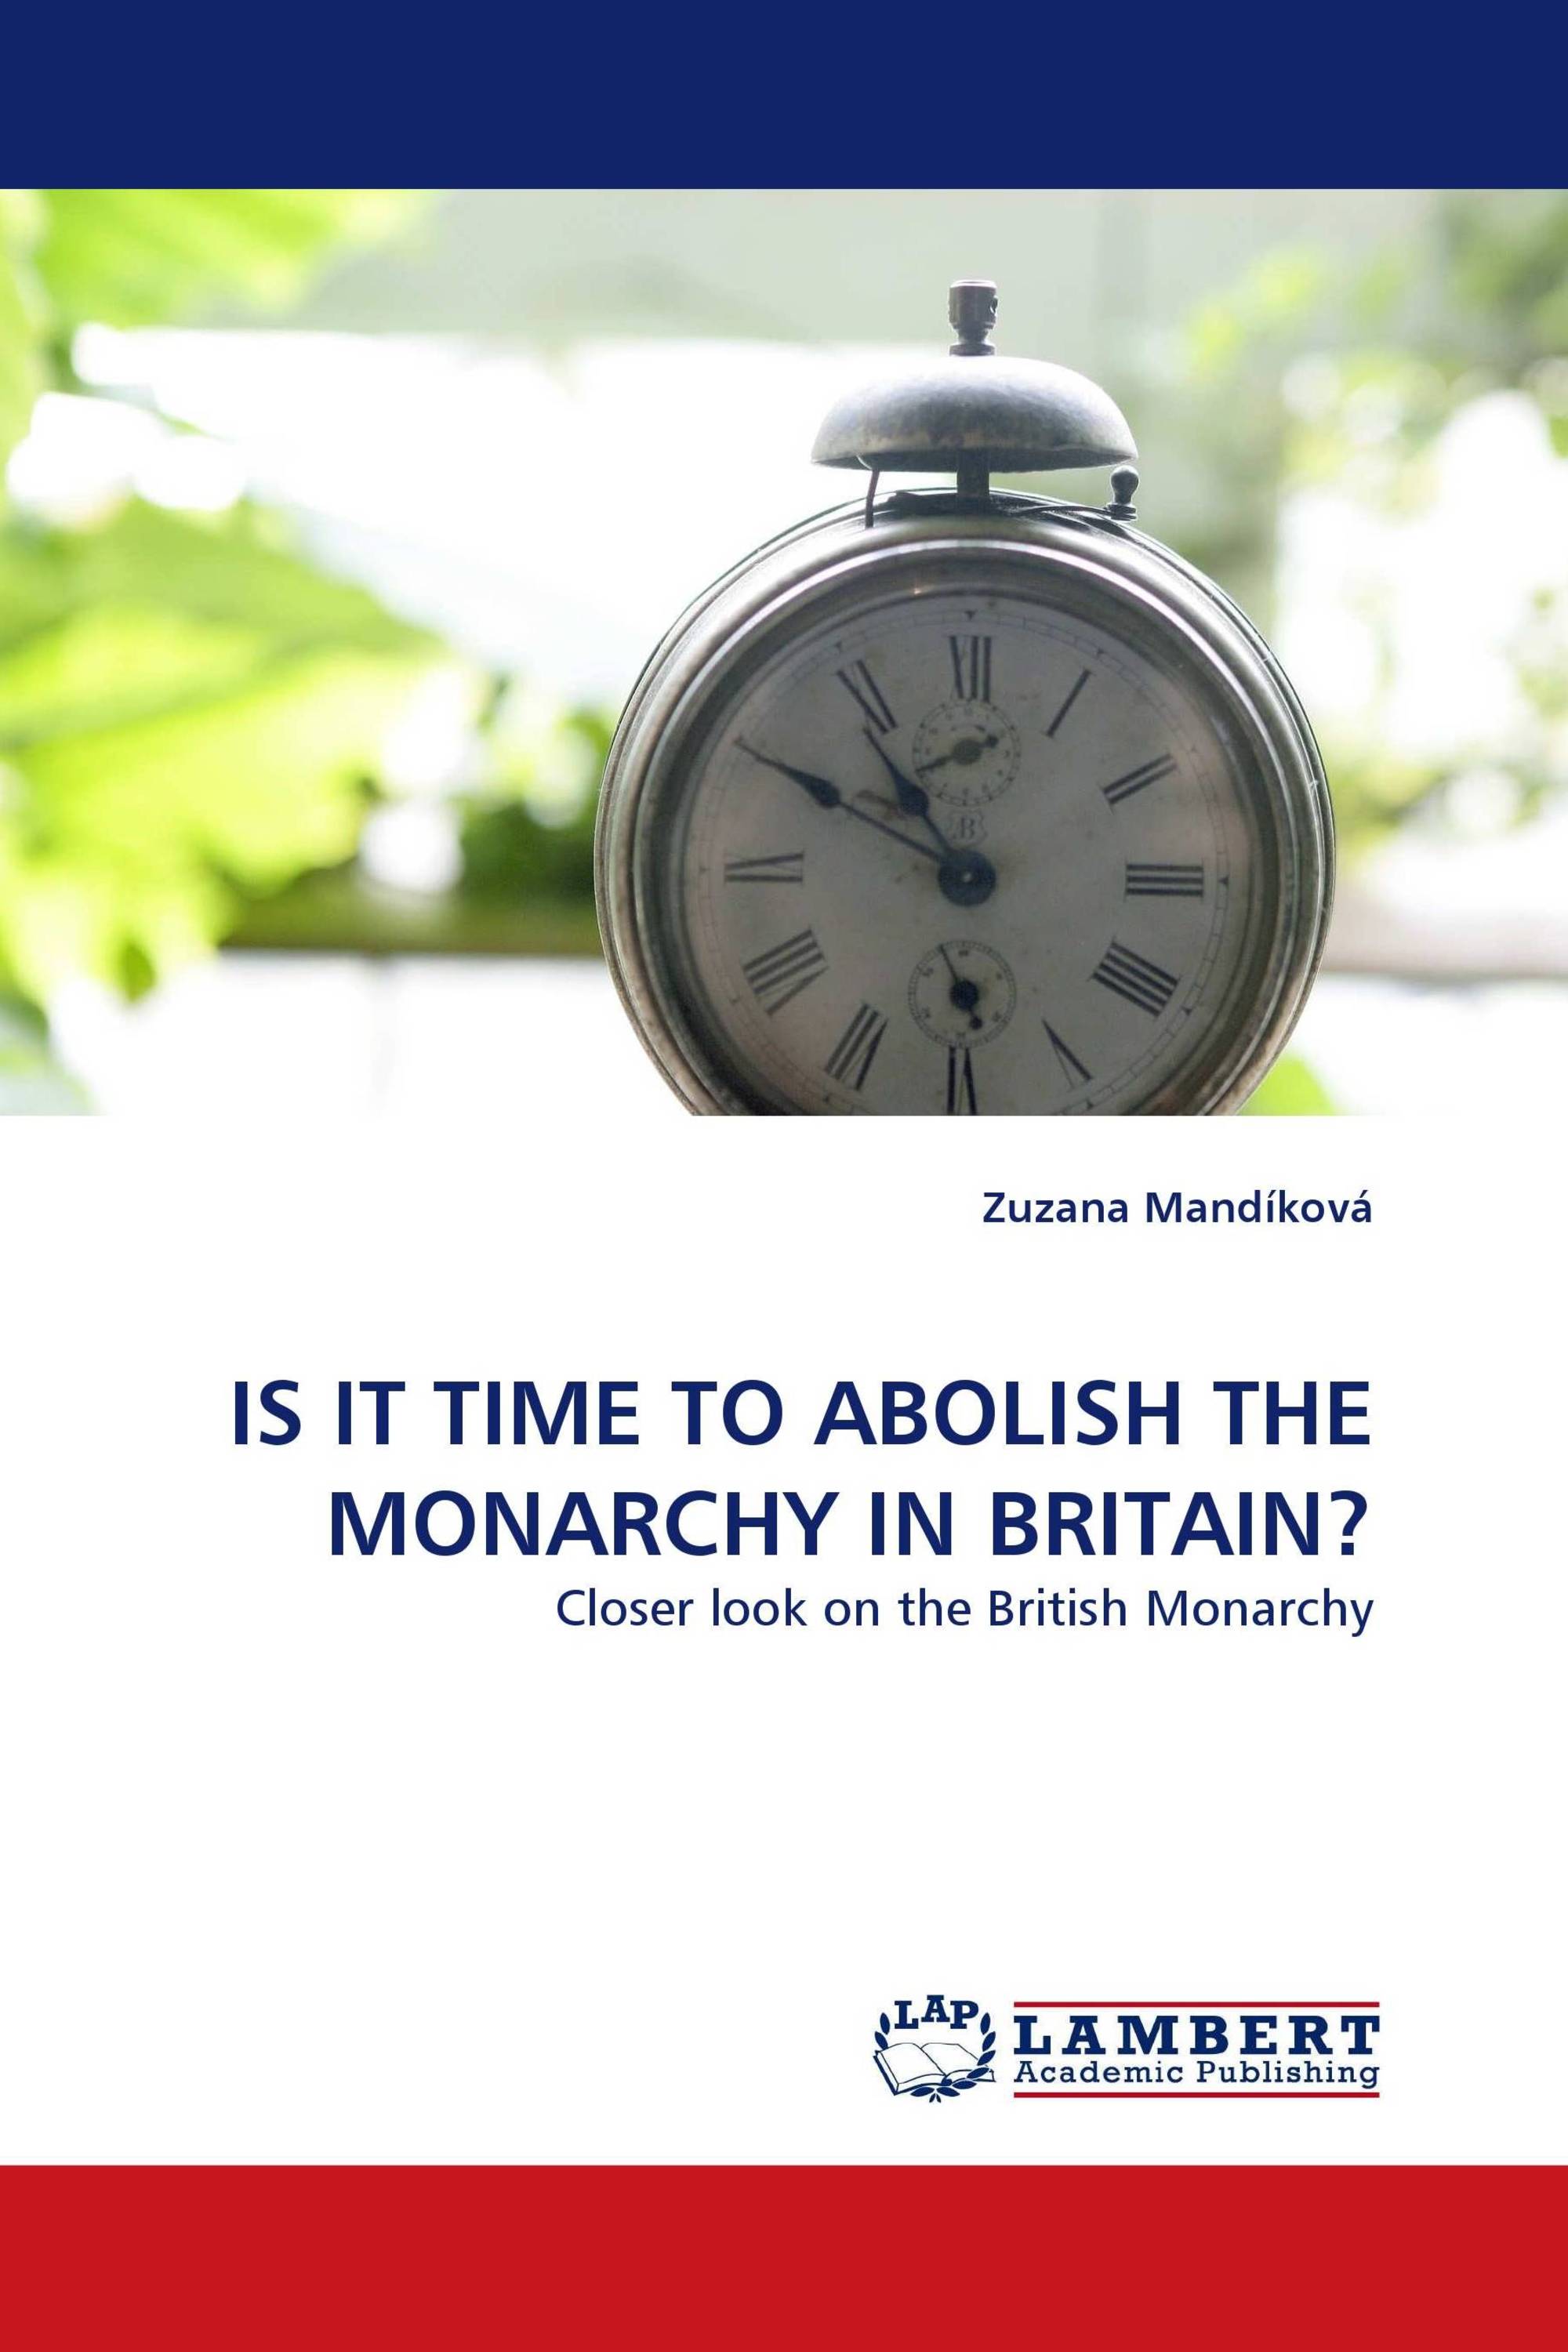 IS IT TIME TO ABOLISH THE MONARCHY IN BRITAIN?